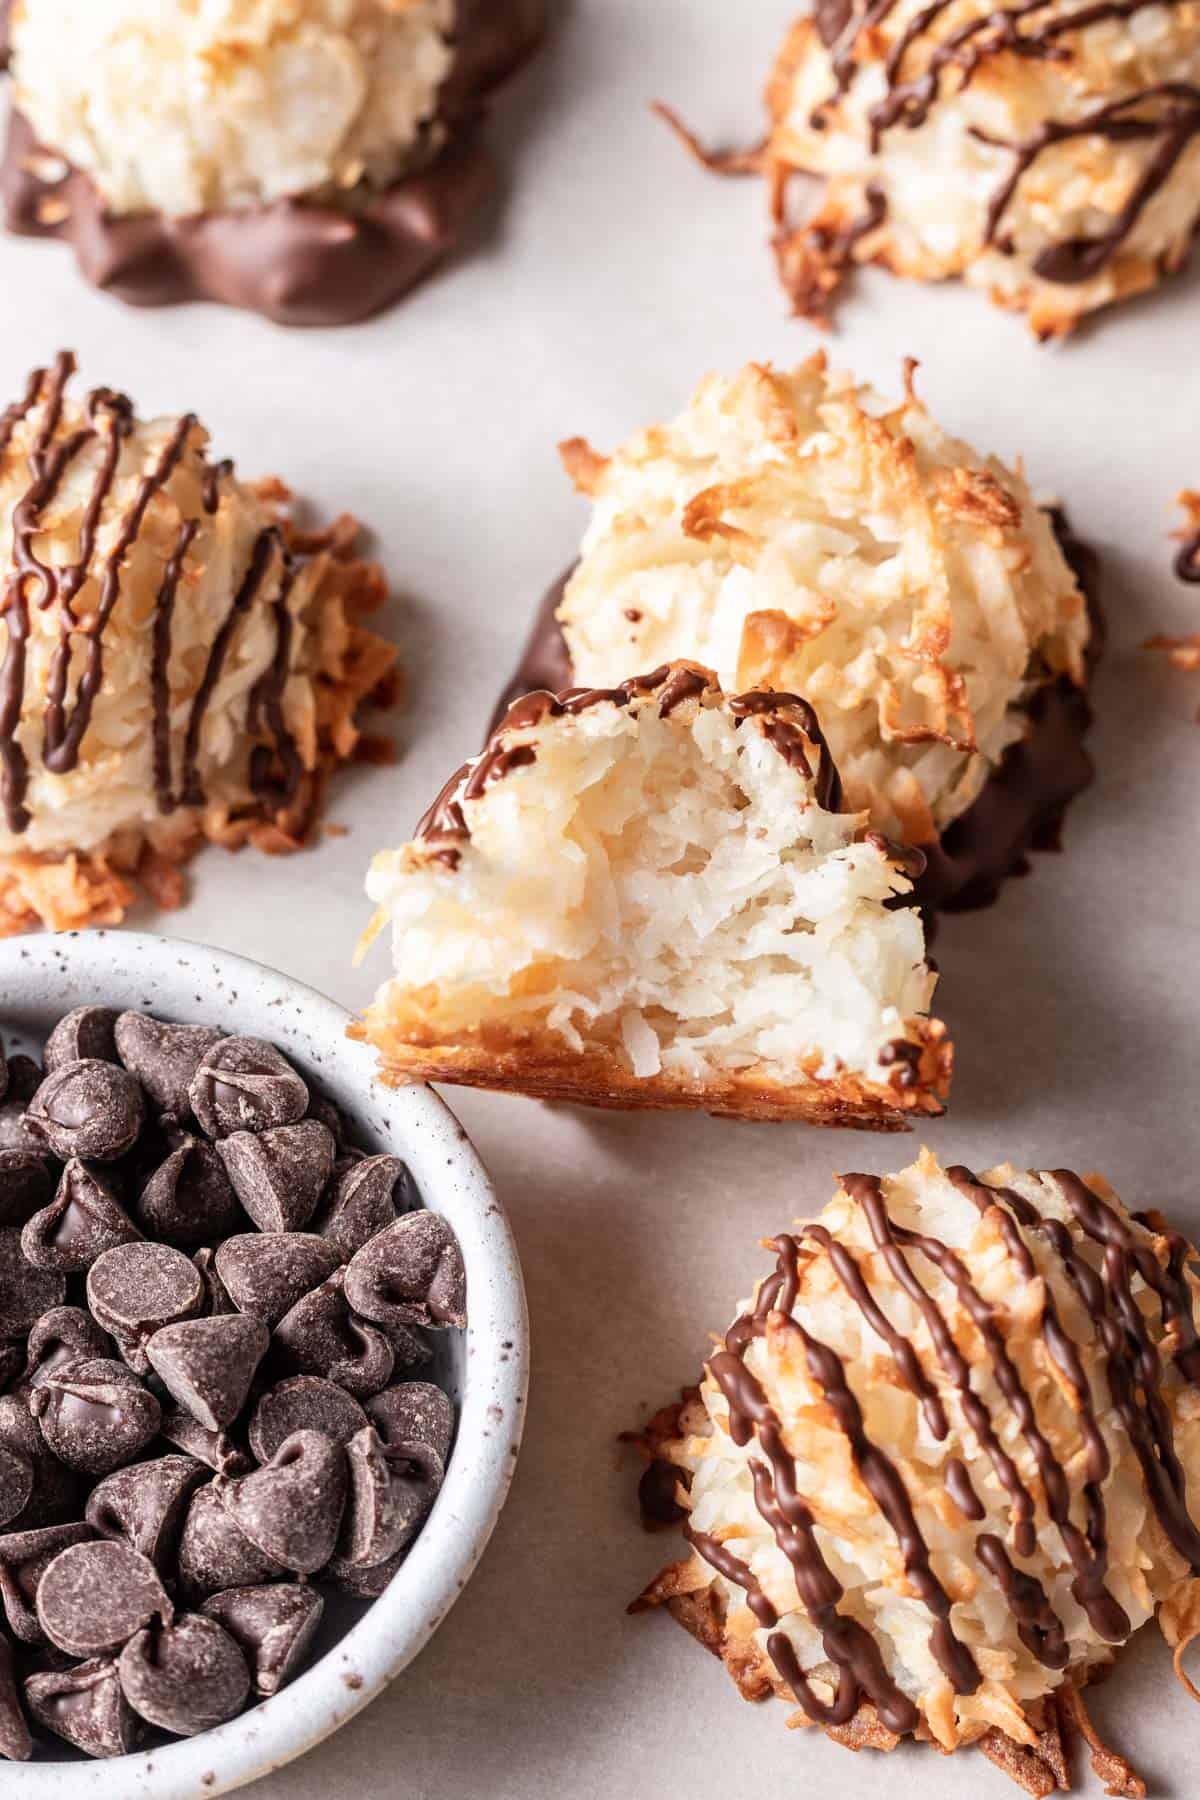 Coconut macaroons without condensed milk with a bite taken out.